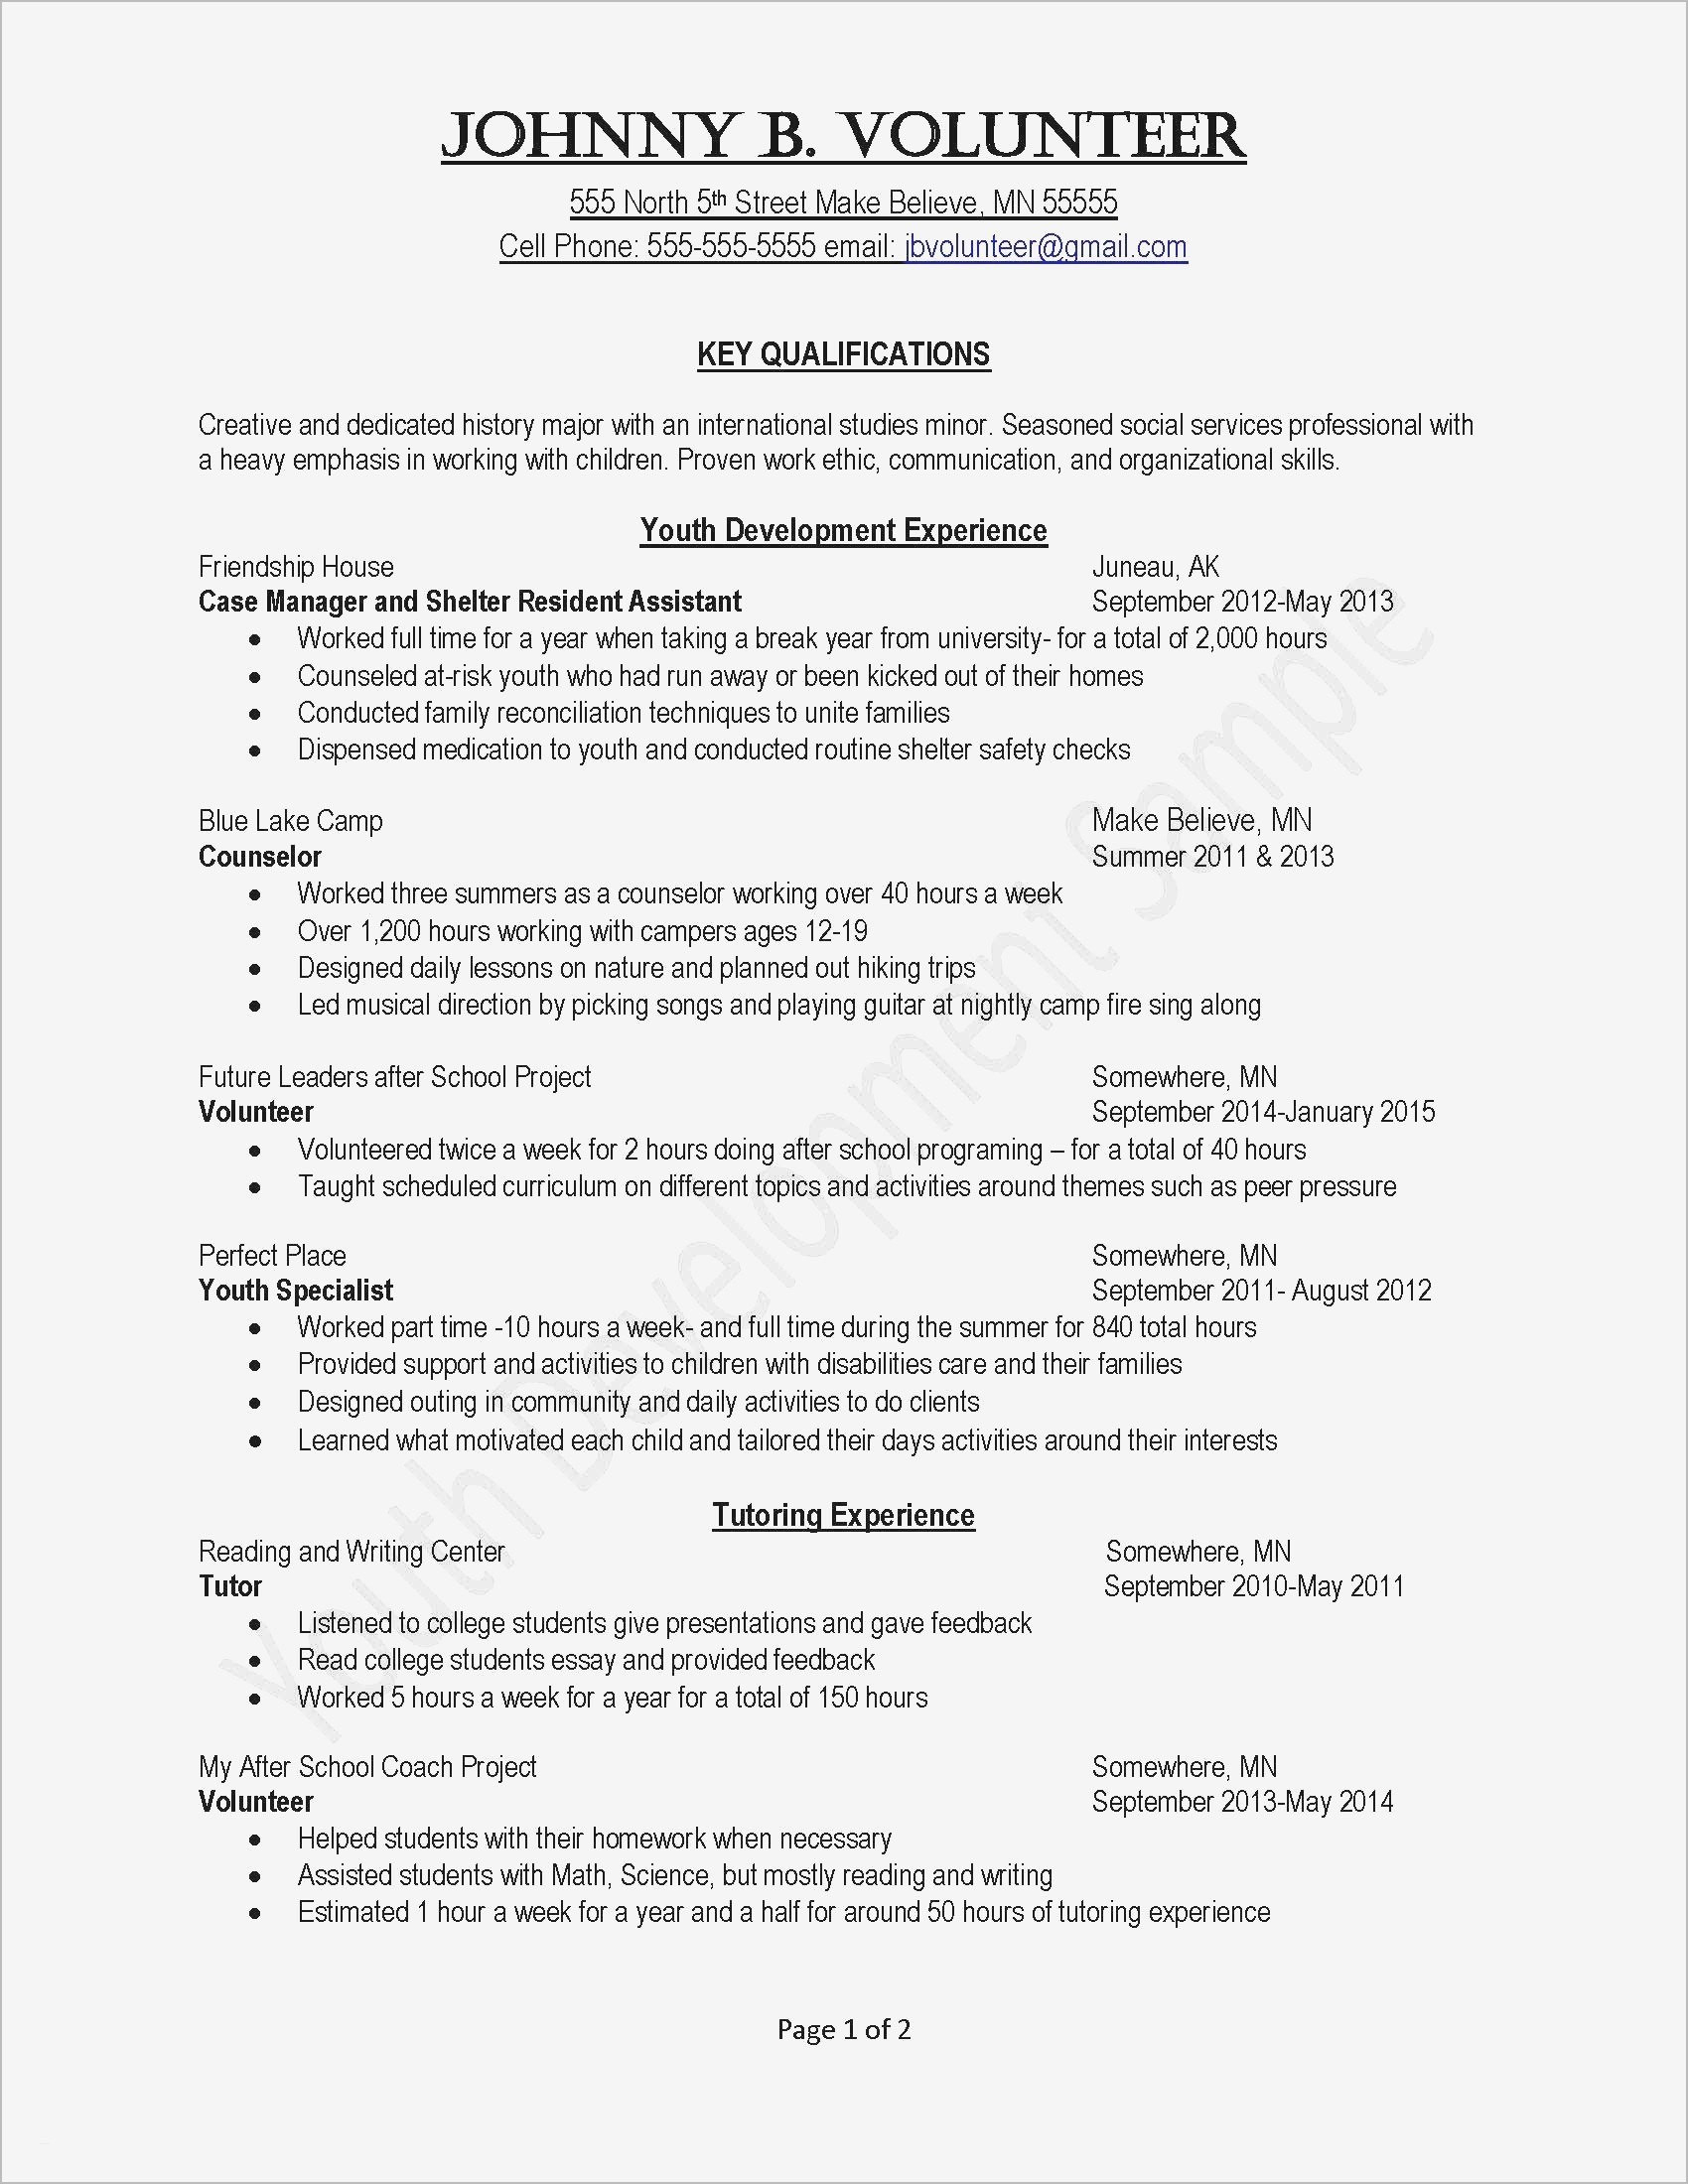 Compassion International Letter Template - Resume Template Line Free Fresh Job Fer Letter Template Us Copy Od